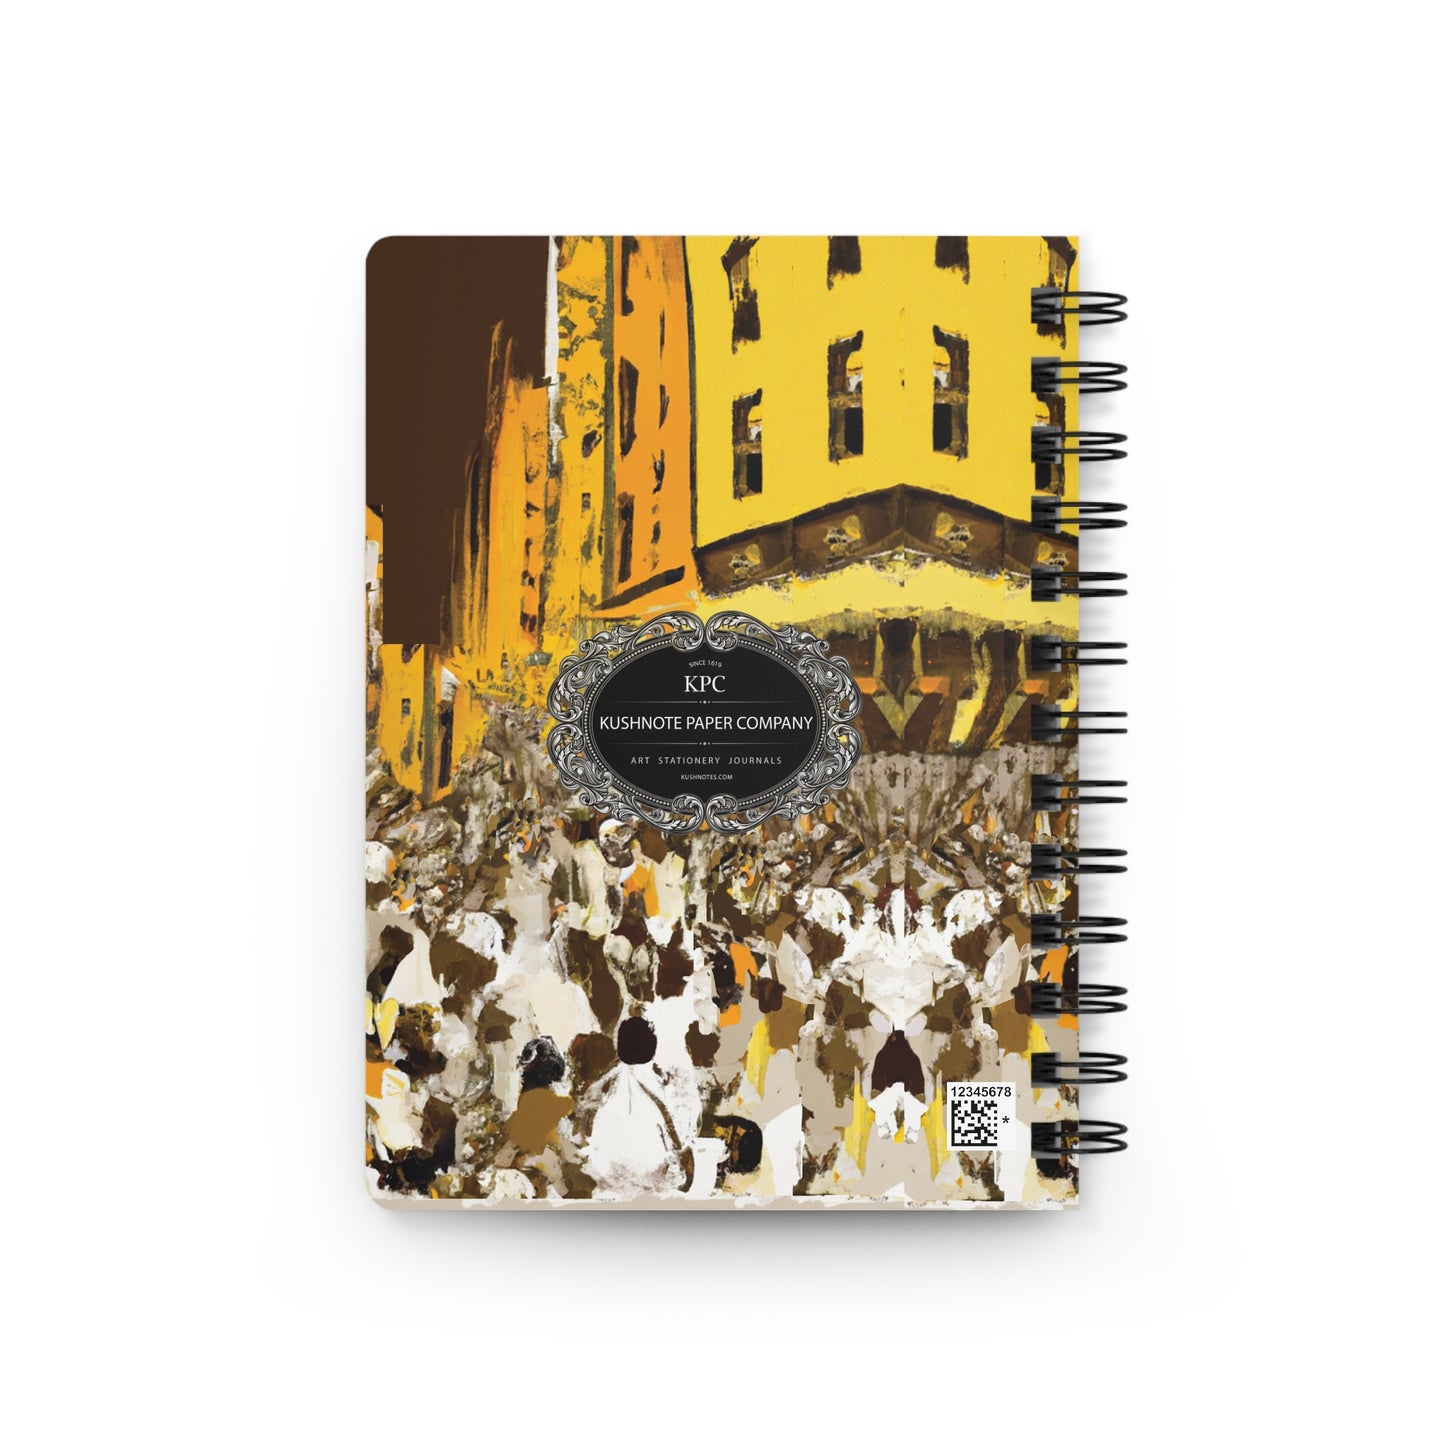 Official Spiral Bound Notebooks and Journals with 2023-2024 Year-at-a-Glance Calendar